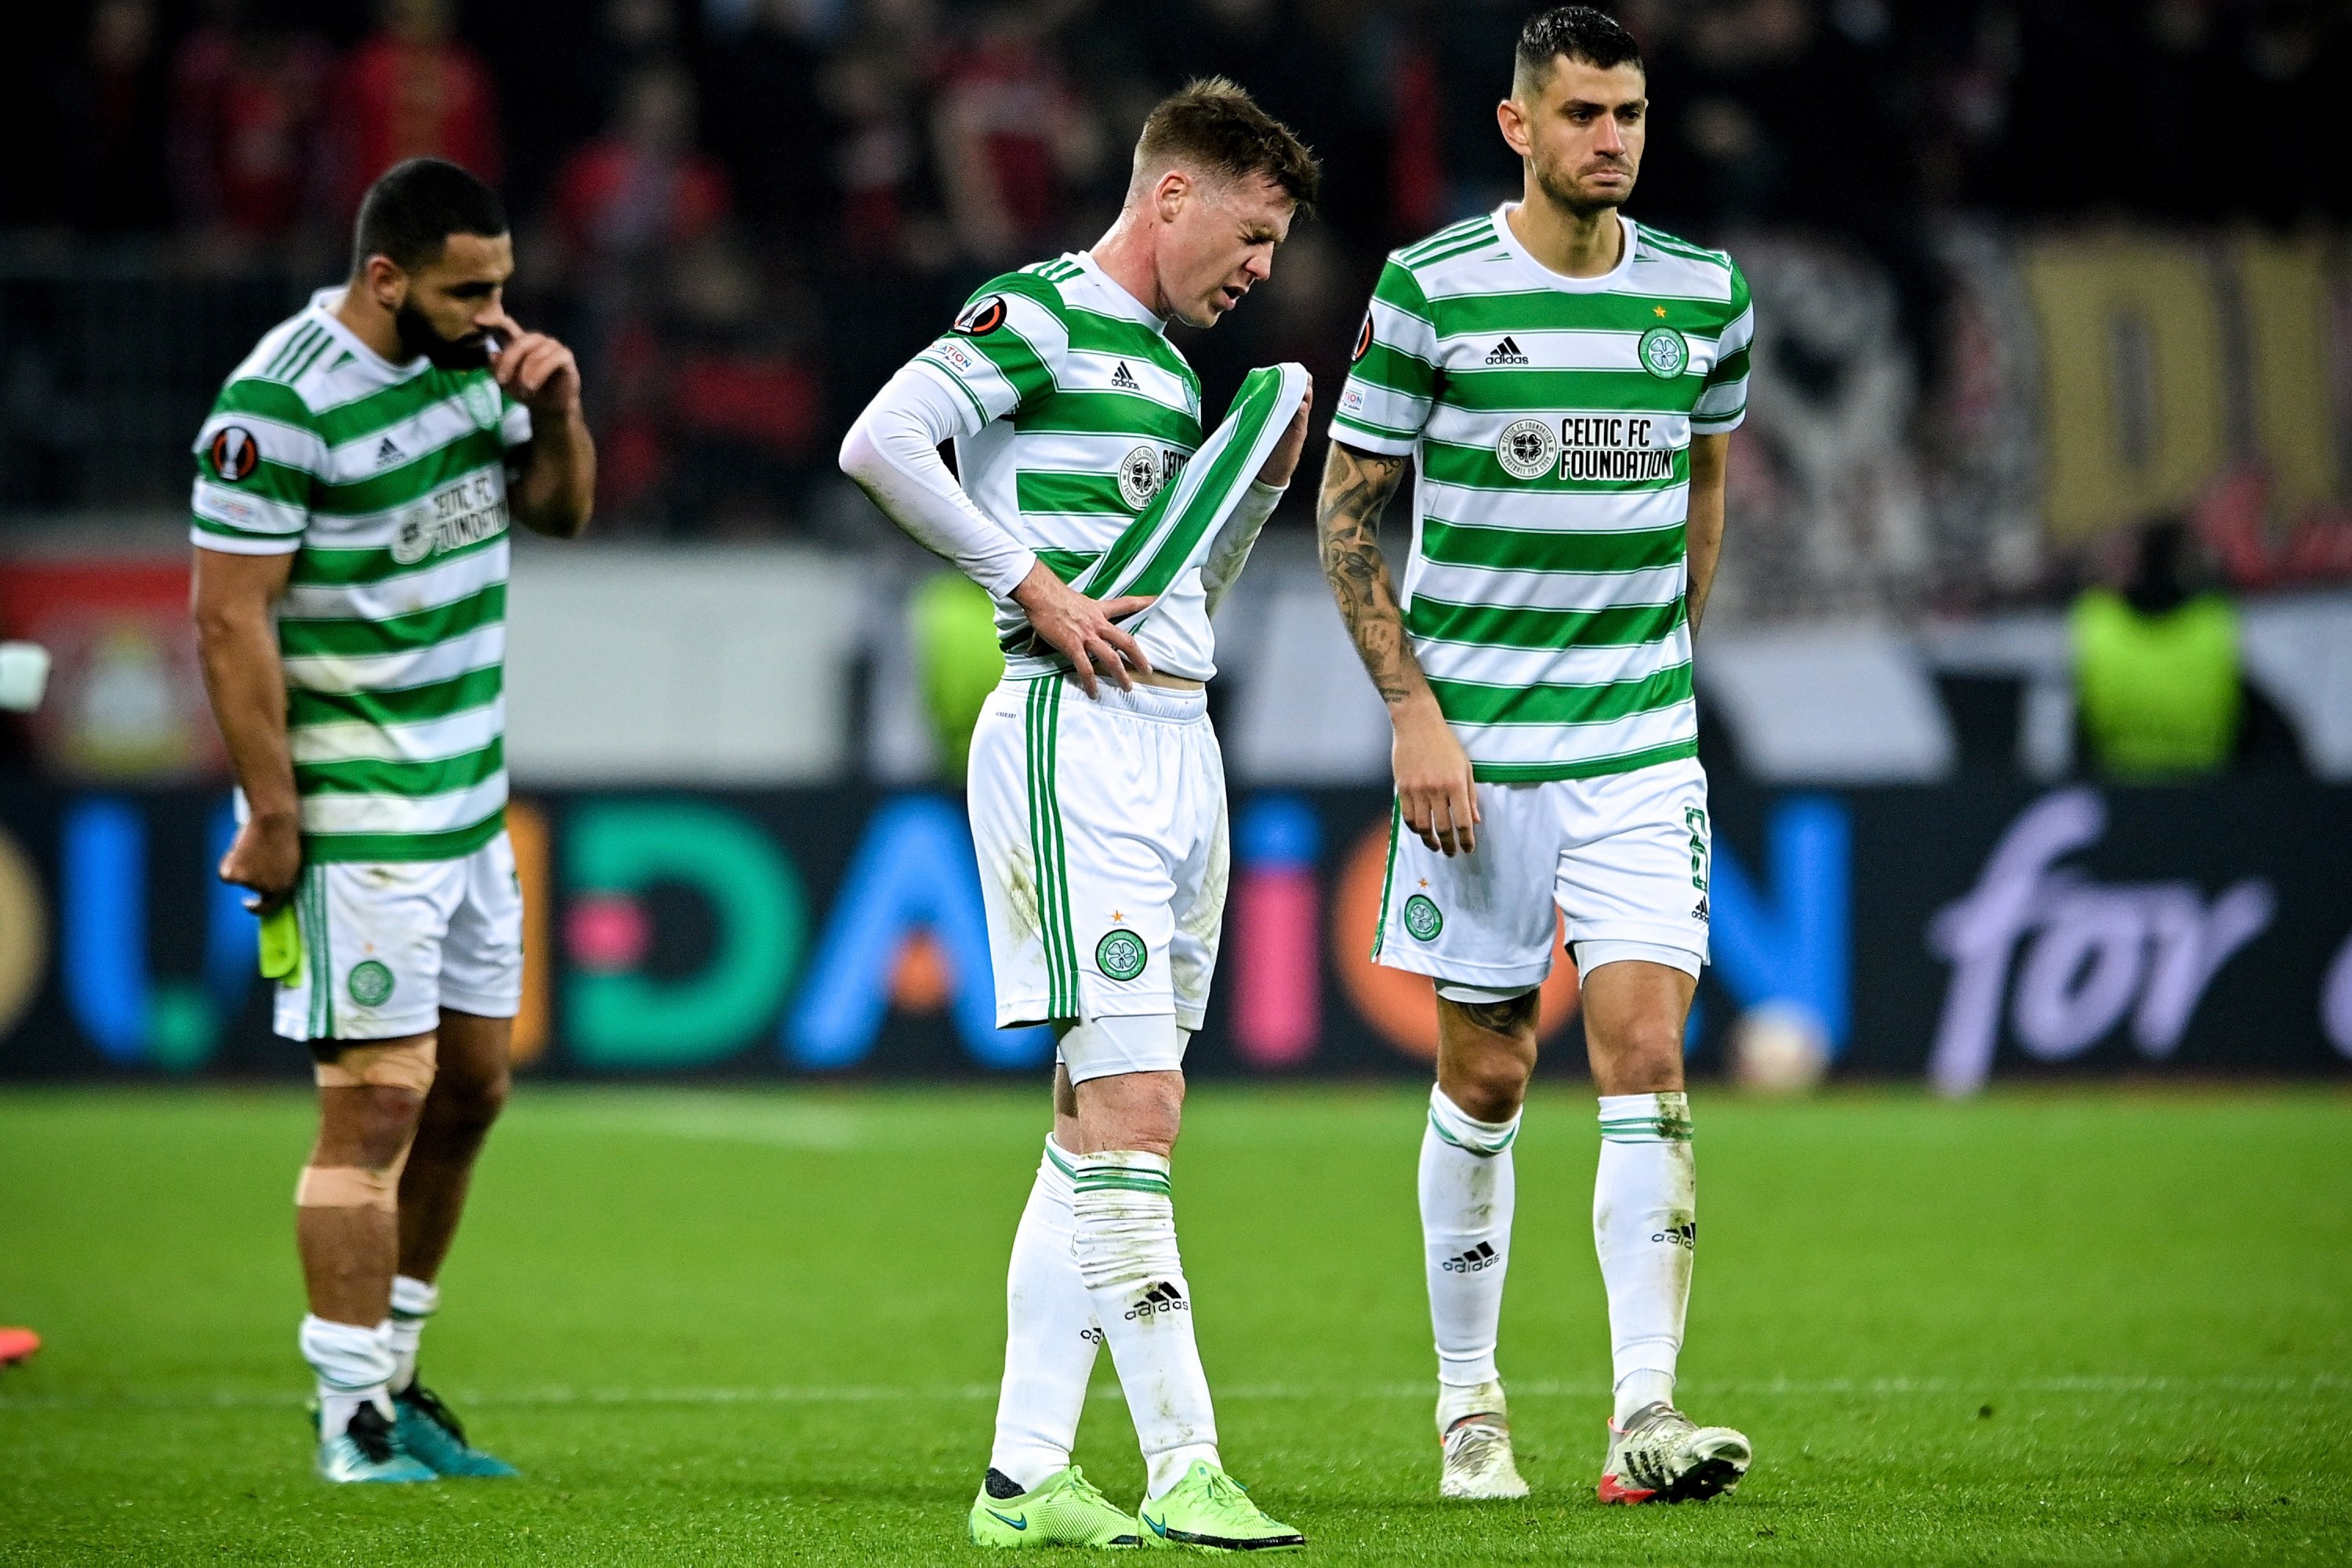 Celtic's James McCarthy (C) and his teammates react after losing a Europa League match against Bayer Leverkusen, Leverkusen, Germany, Nov. 25, 2021. (EPA Photo)